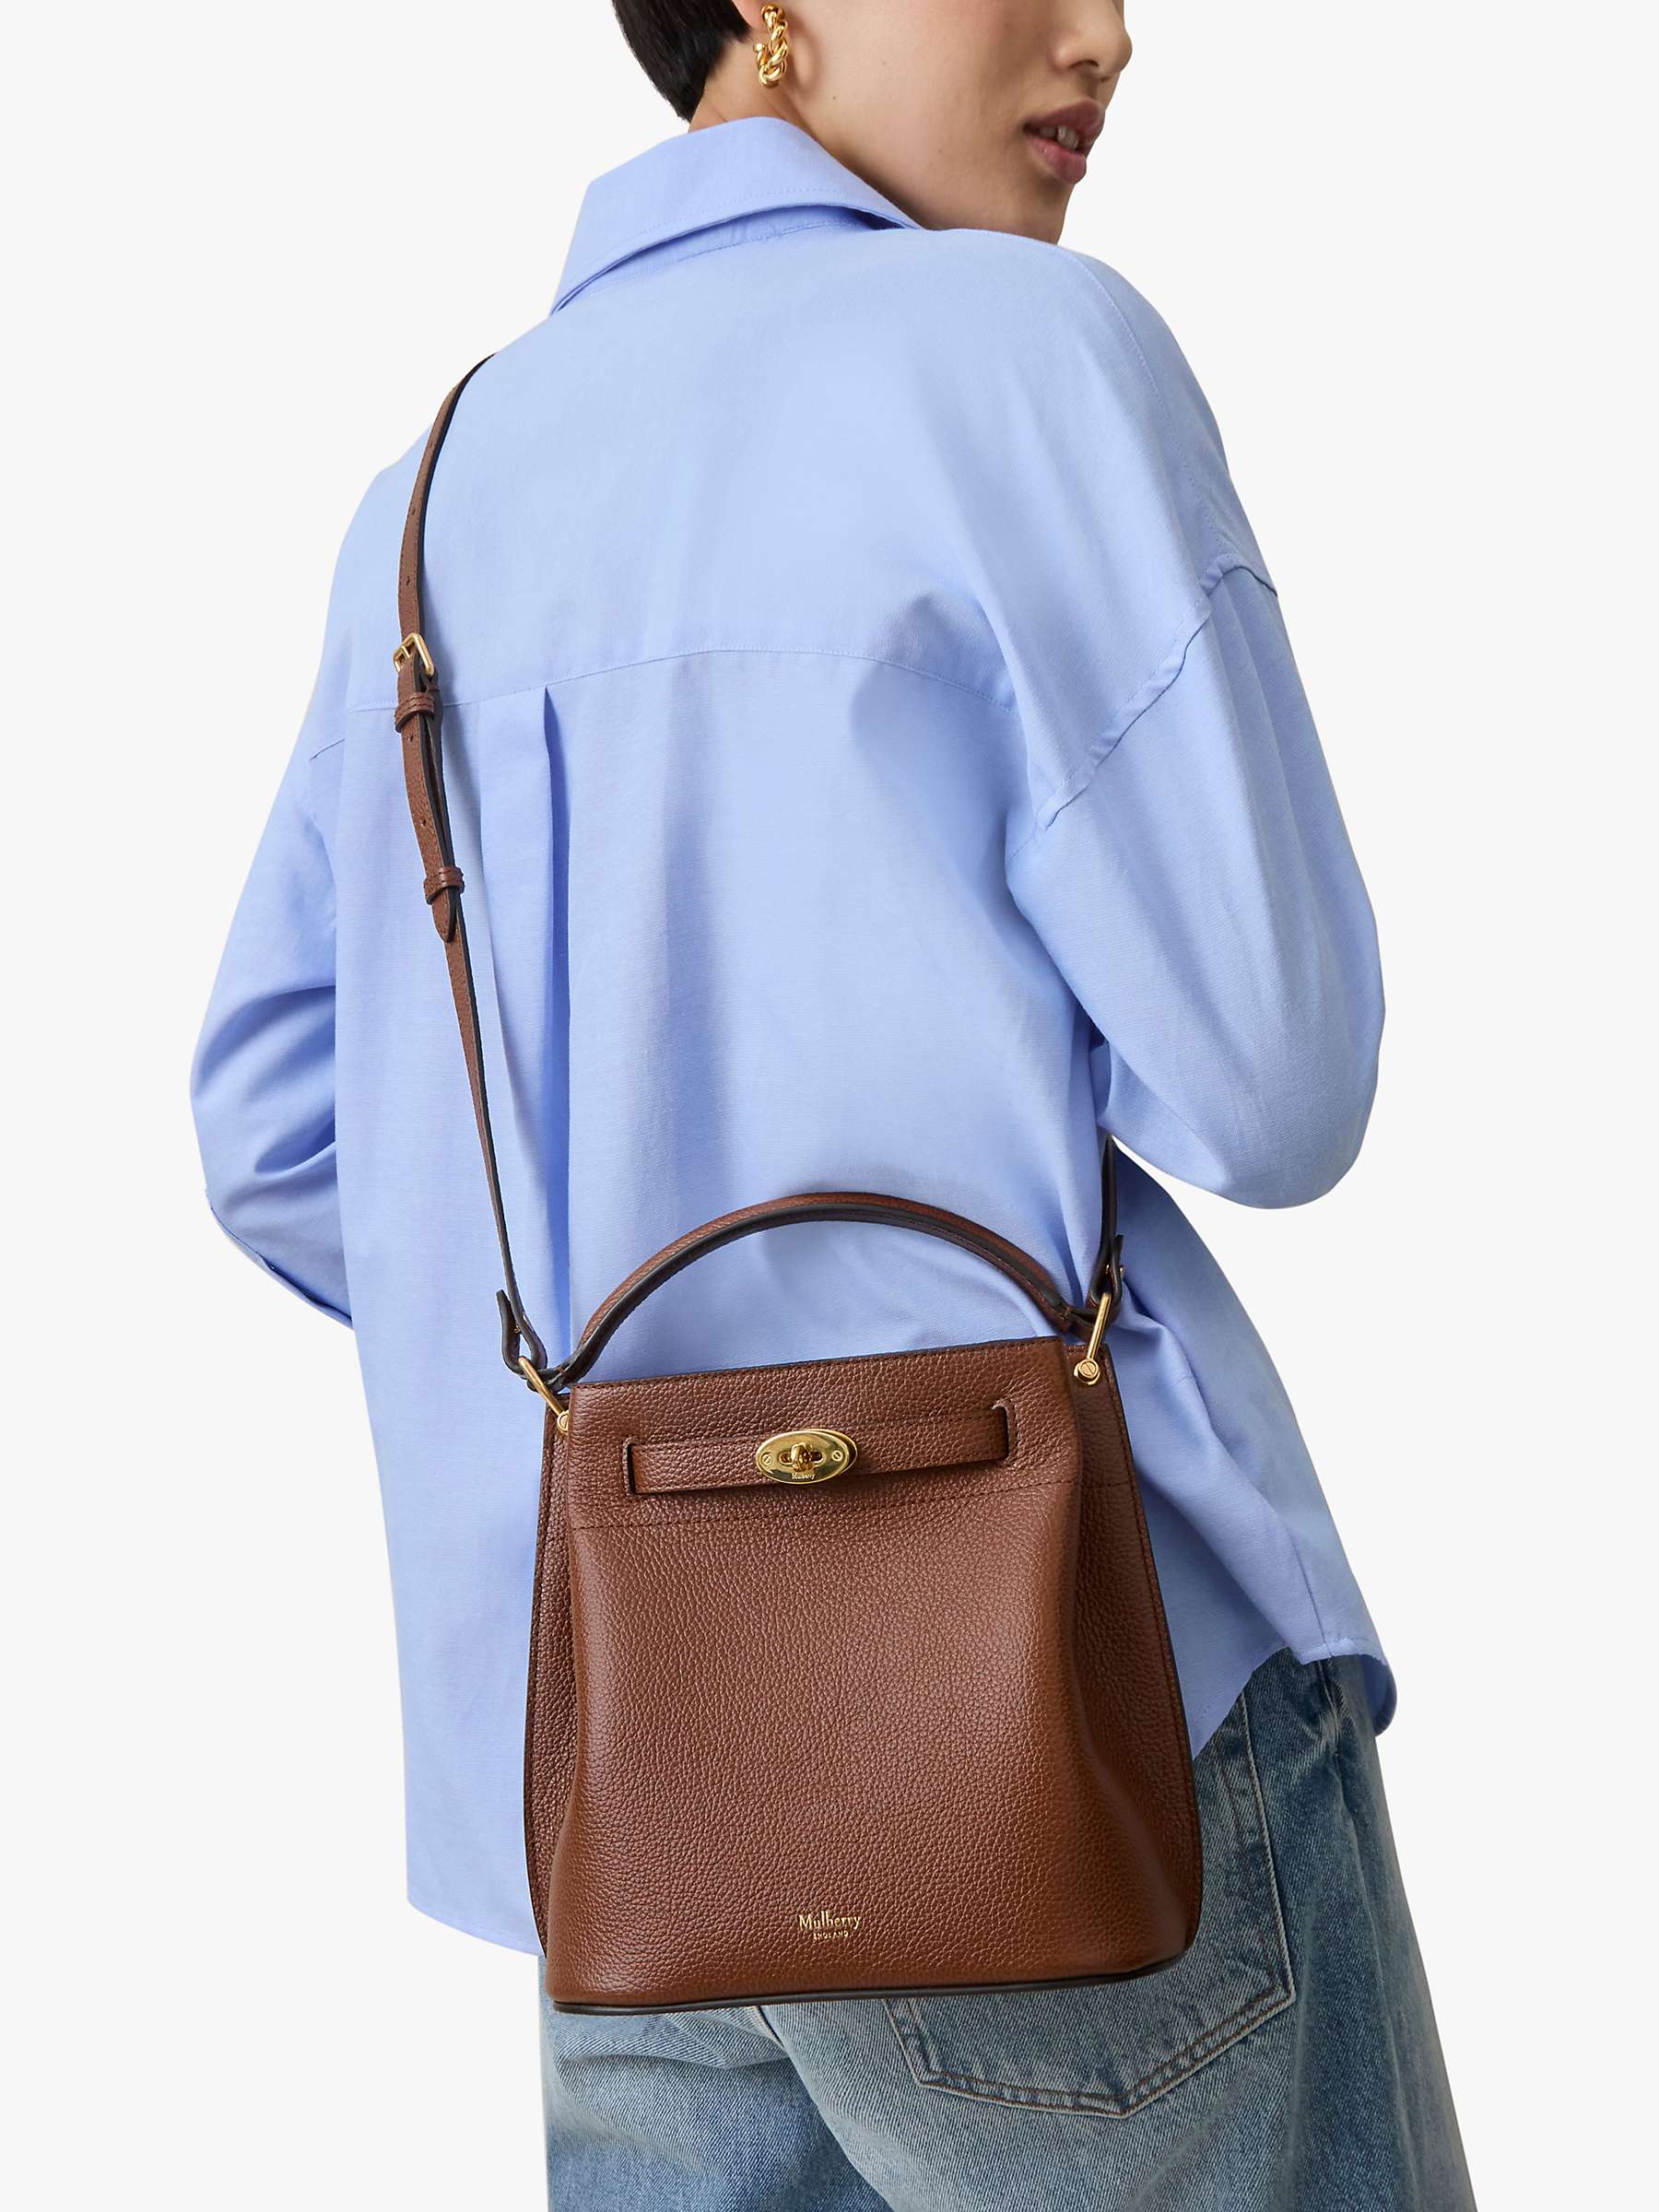 Buy Mulberry Islington Small Classic Grain Leather Bucket Bag Online at johnlewis.com